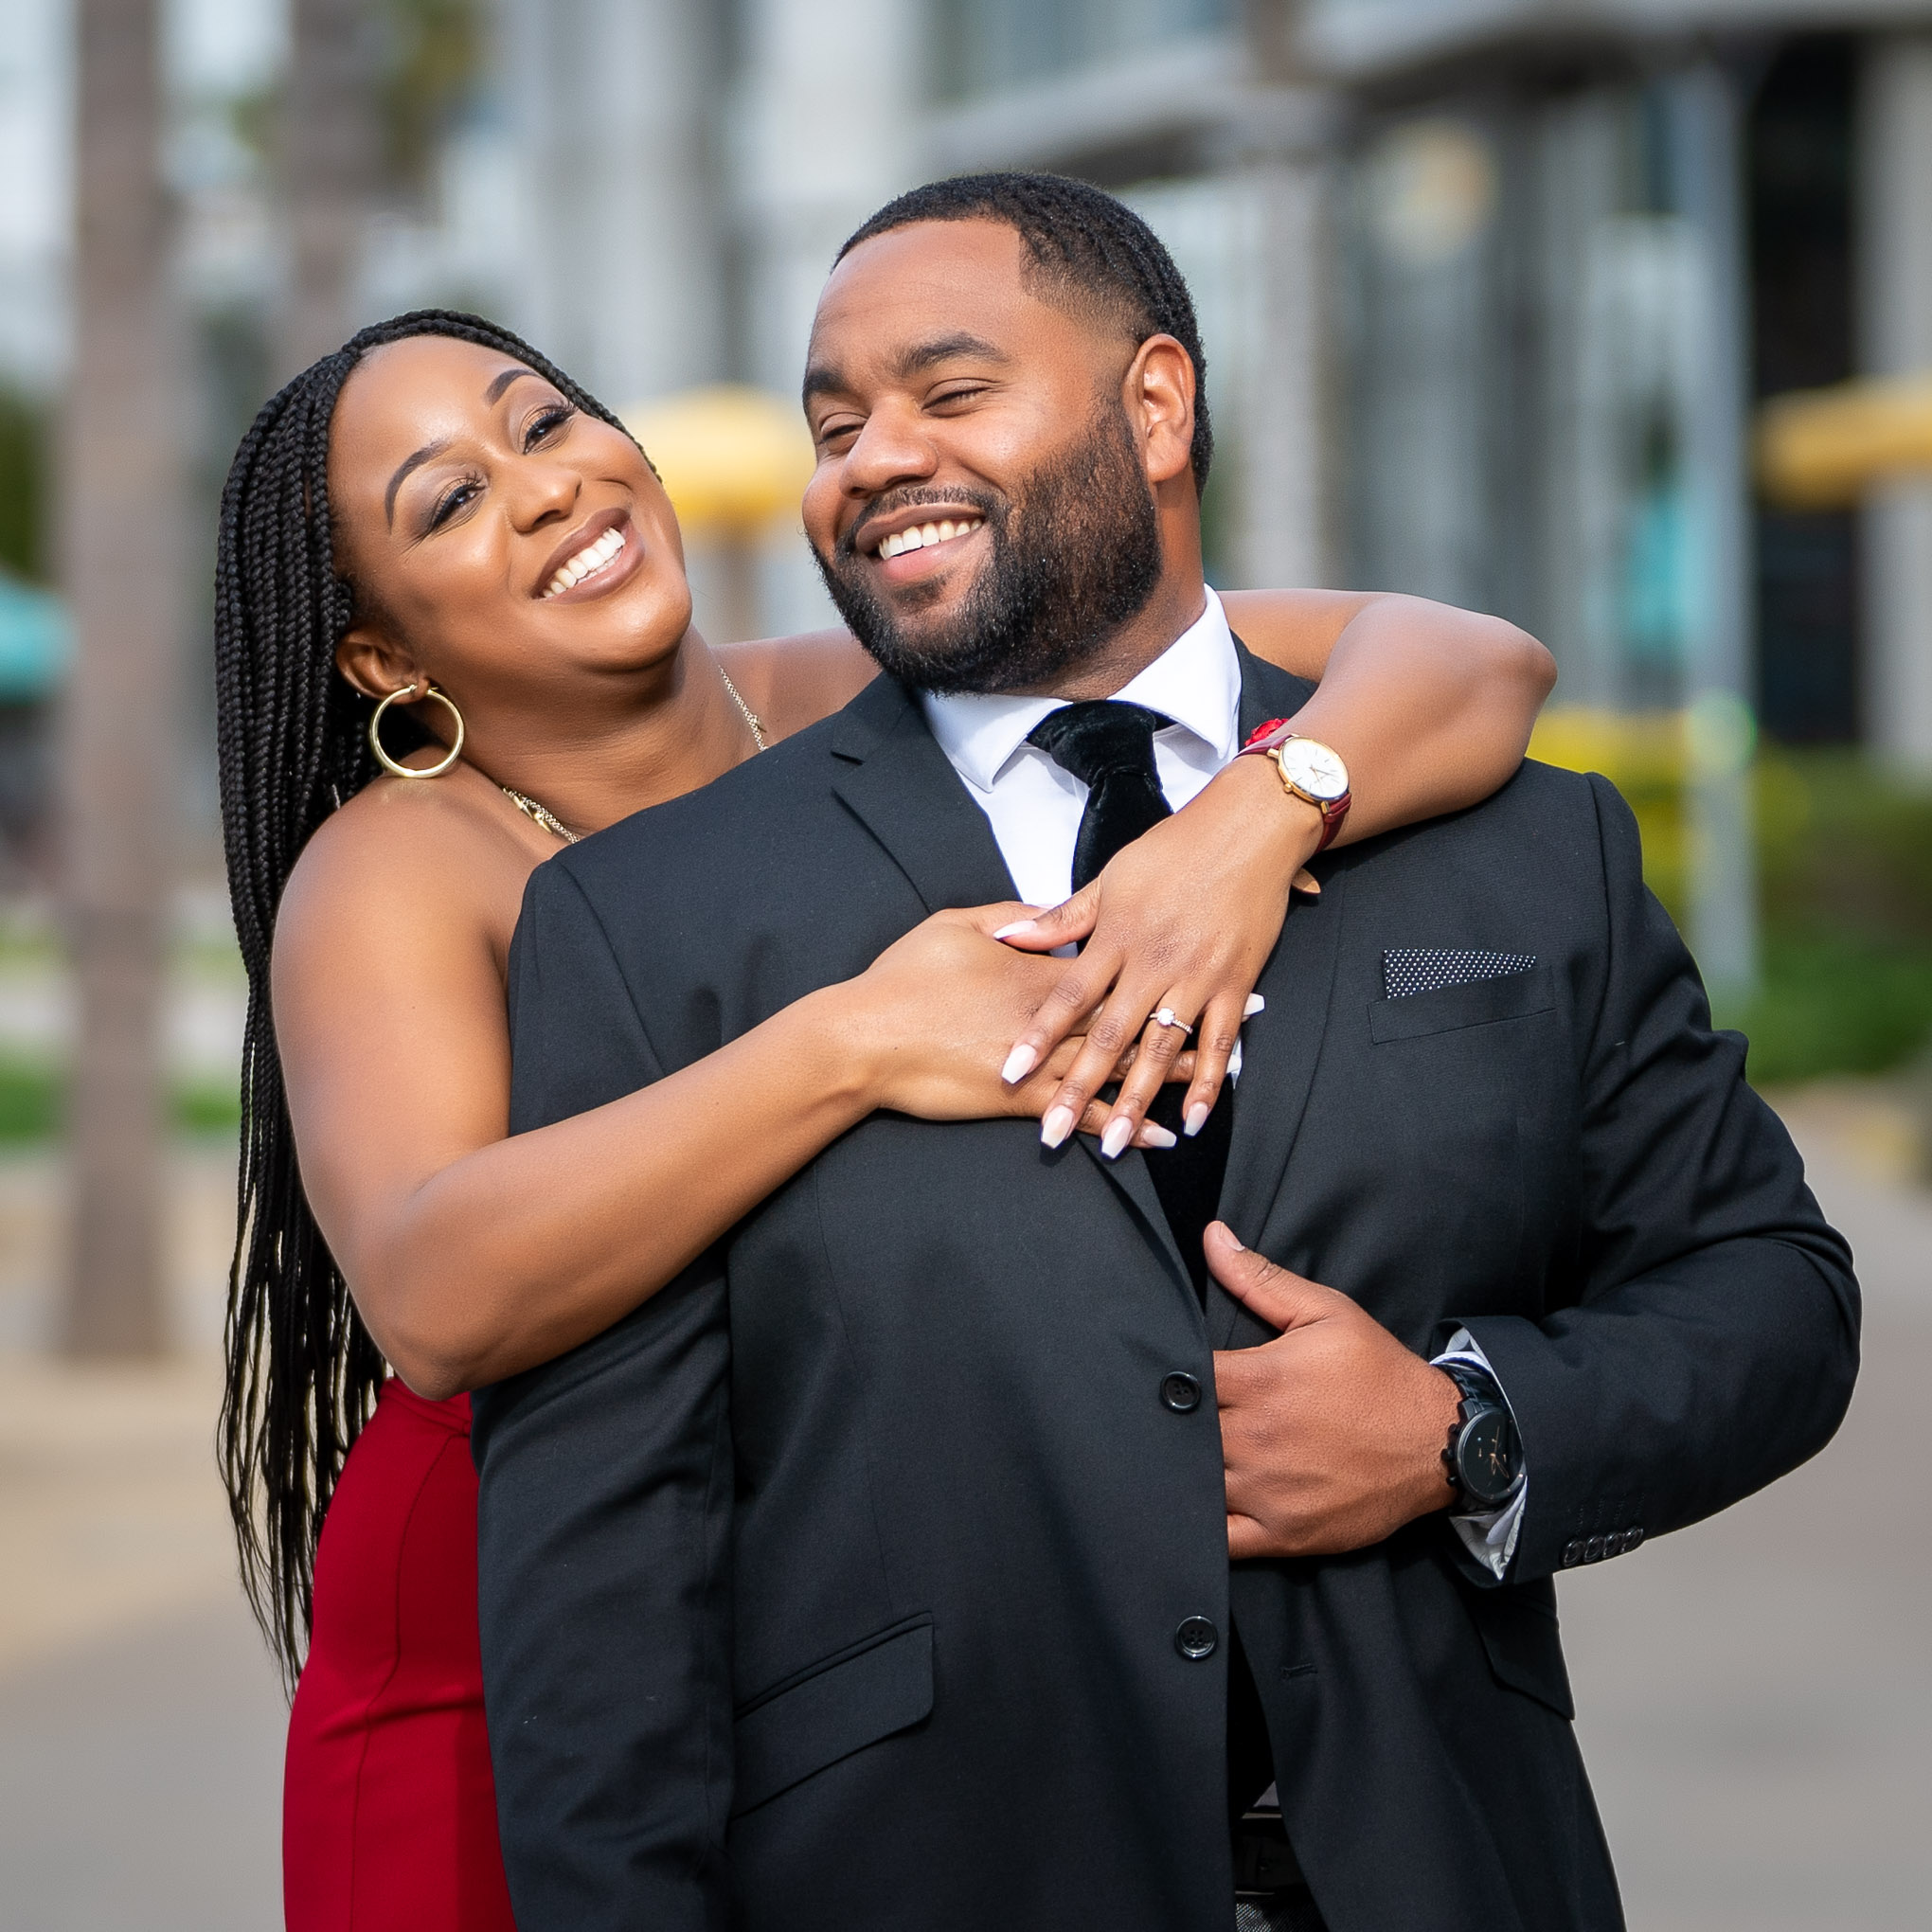 Keith and Trecia Engagement